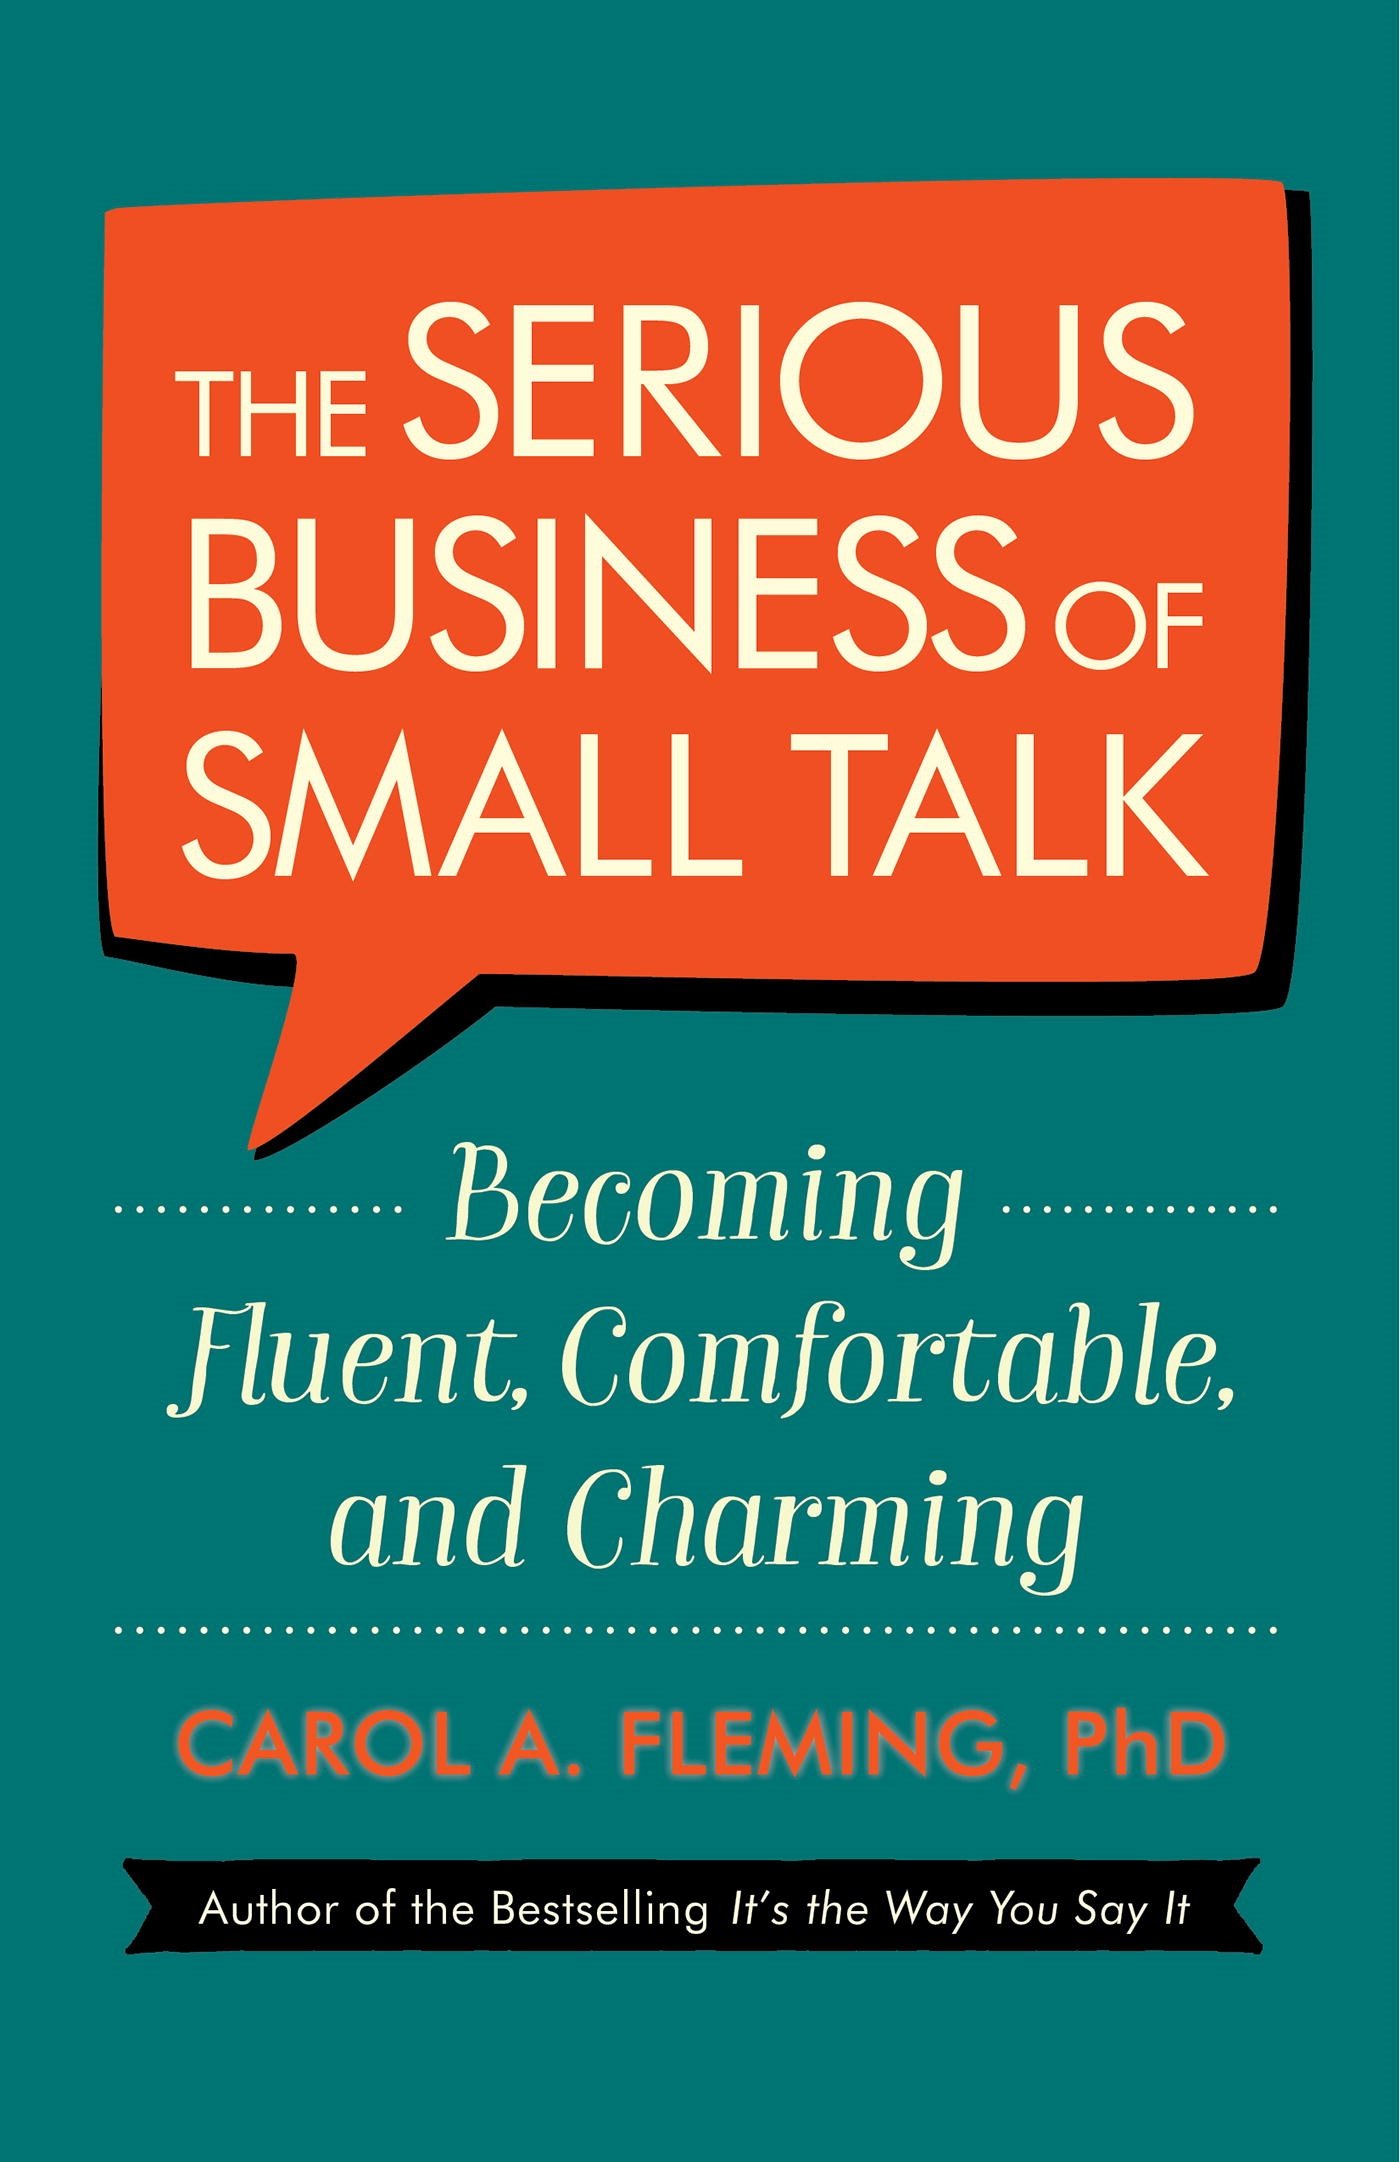 The Serious Business of Small Talk - Becoming Fluent, Comfortable, and Charming | Carol Fleming